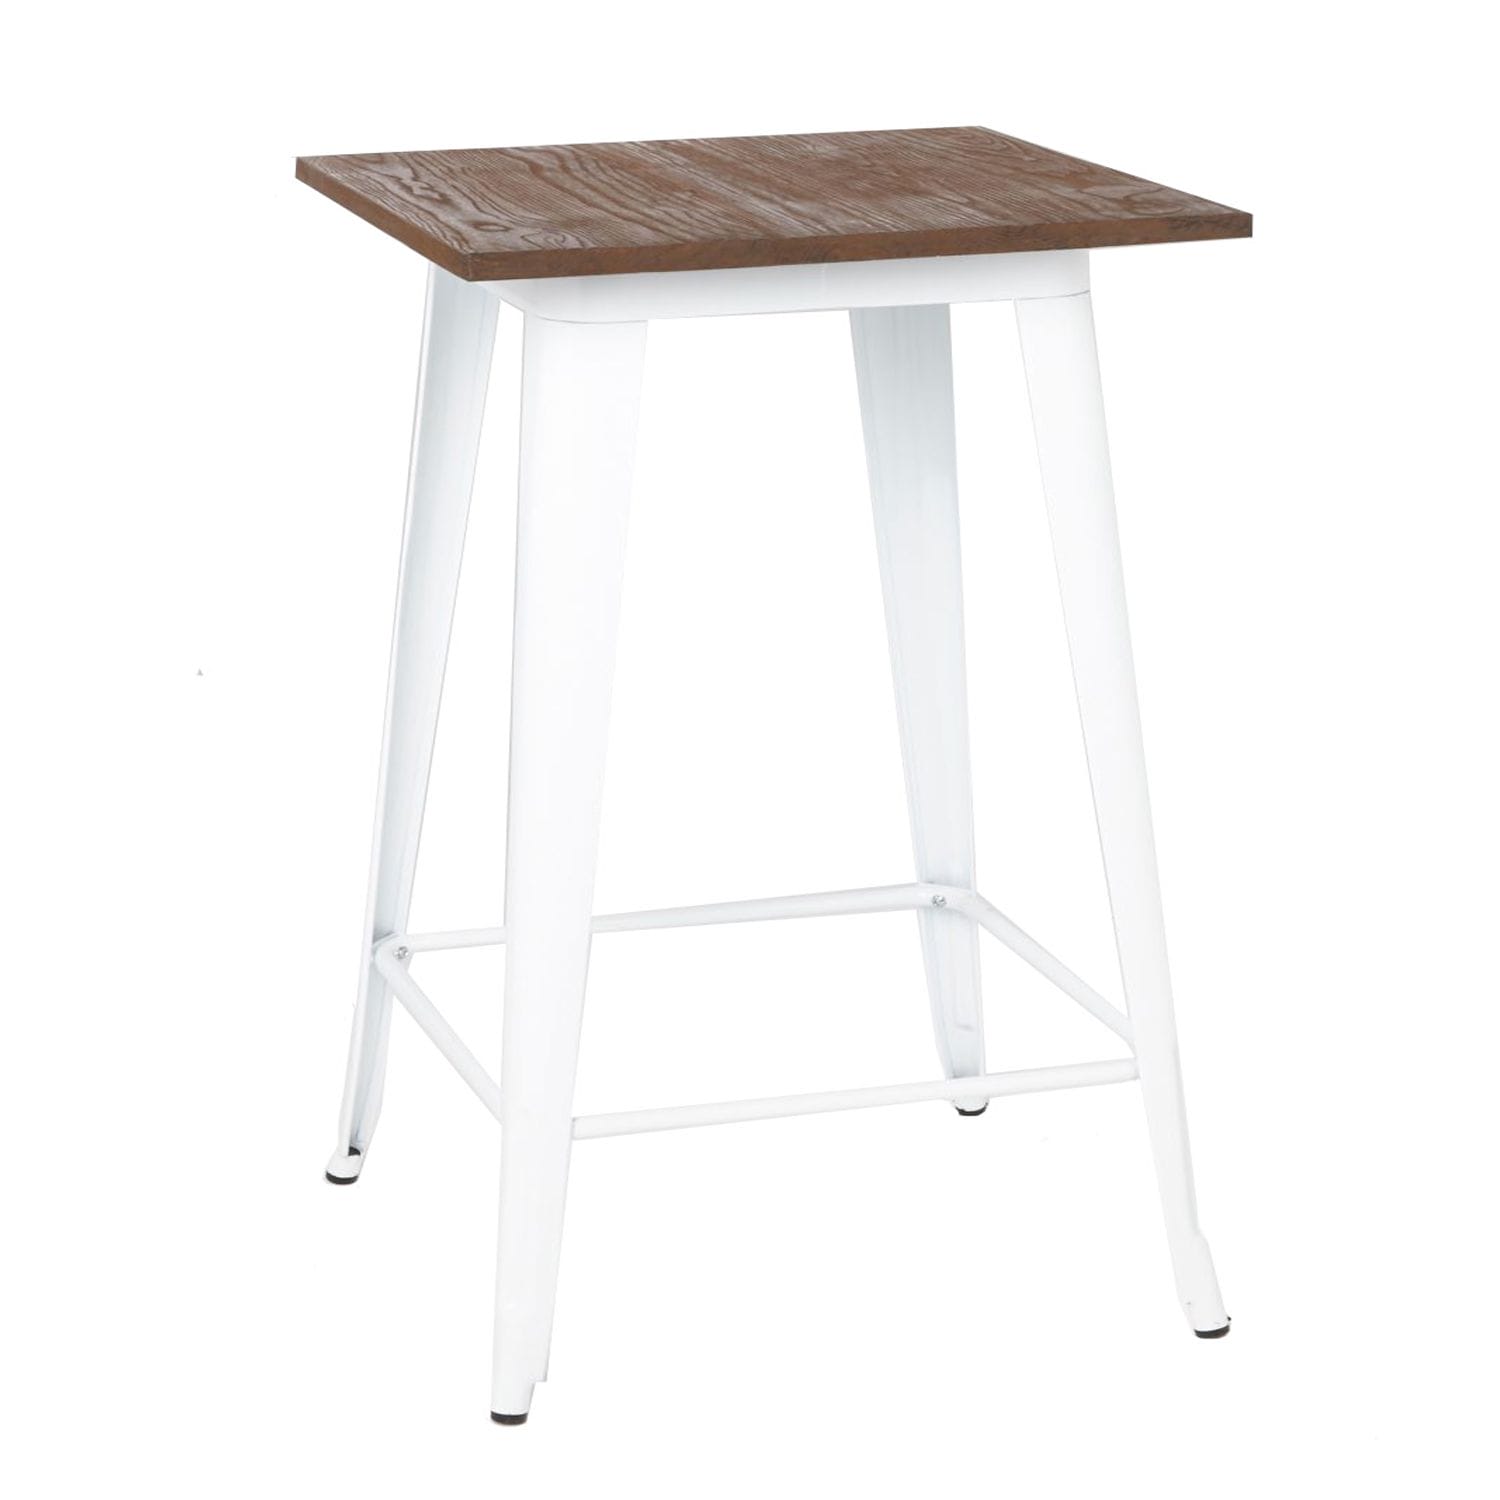 Our Tolix Bar Tables have powder-coated steel legs, a solid wooden top, and rubber feet.